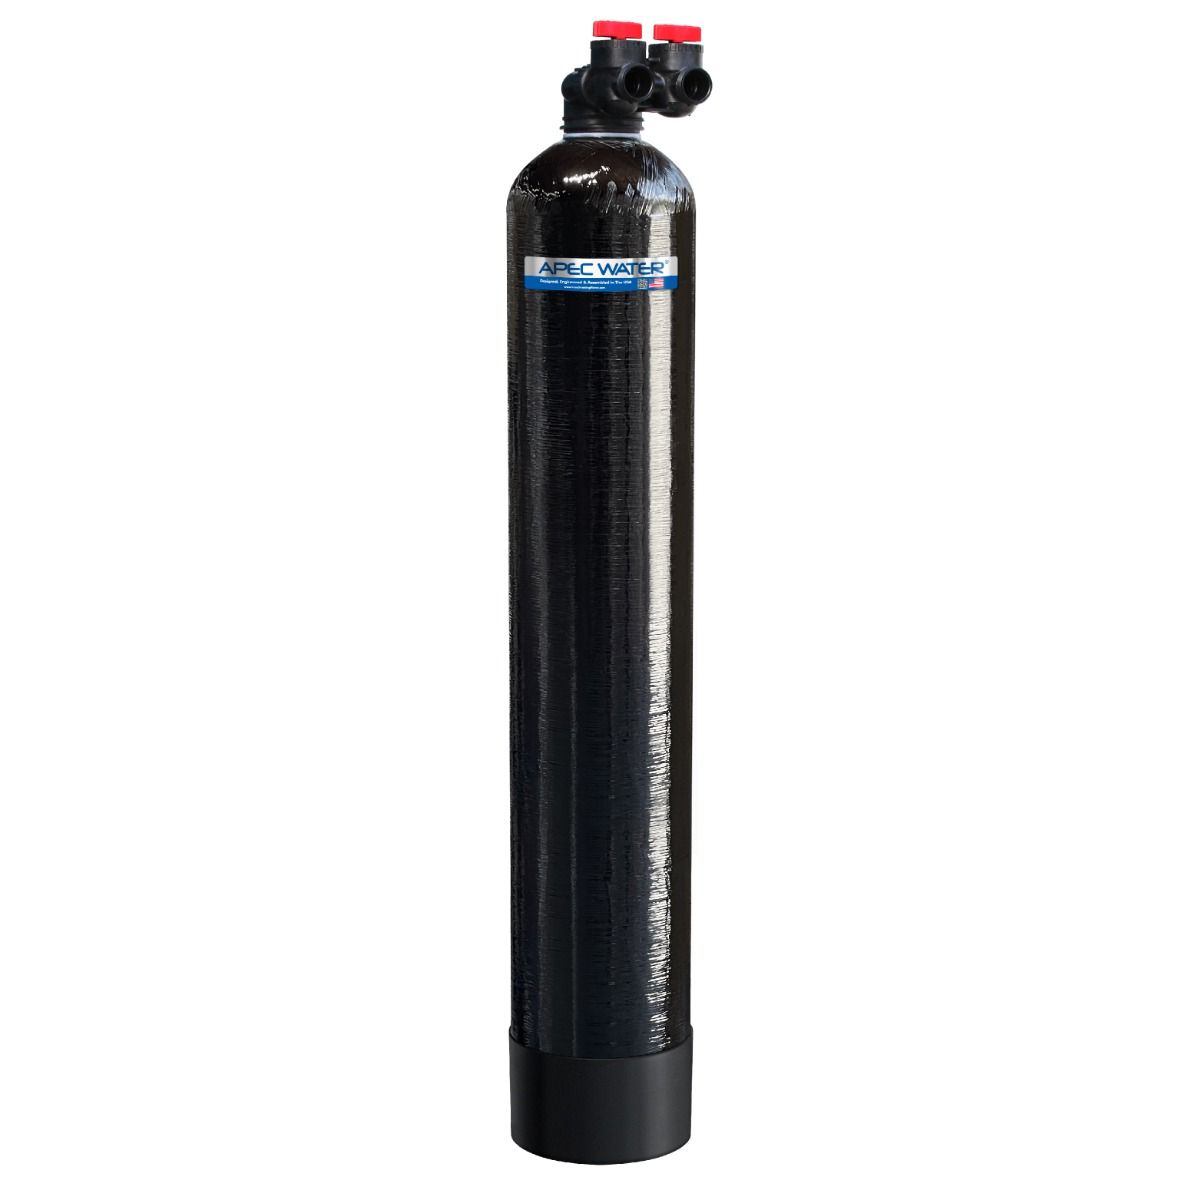 GREEN-CARBON-15-FG Whole House Water Filter System